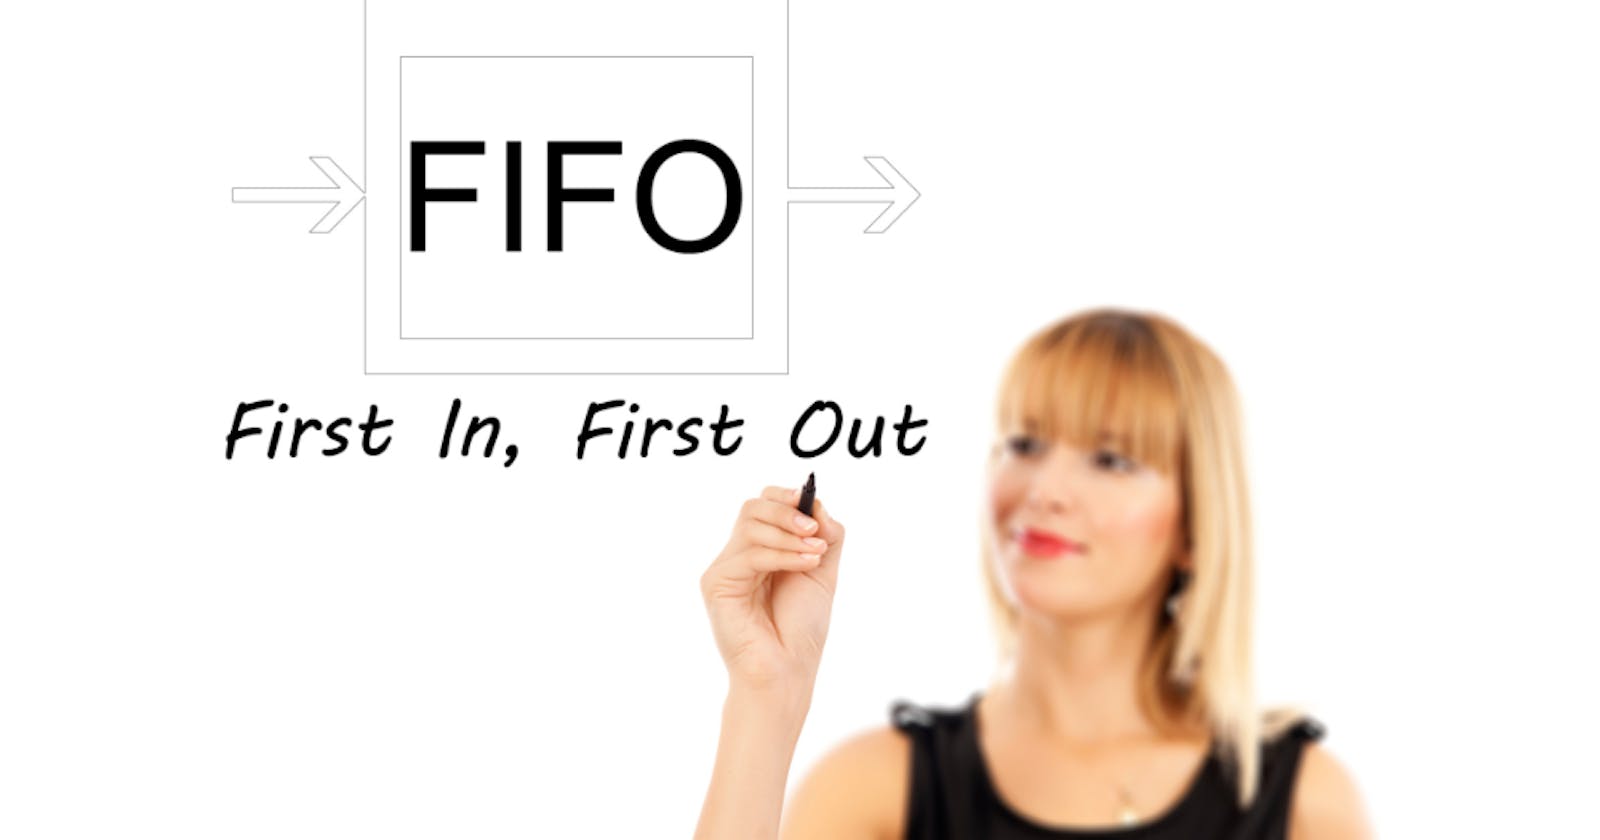 Do you know how the forex trading term "FIFO" works?